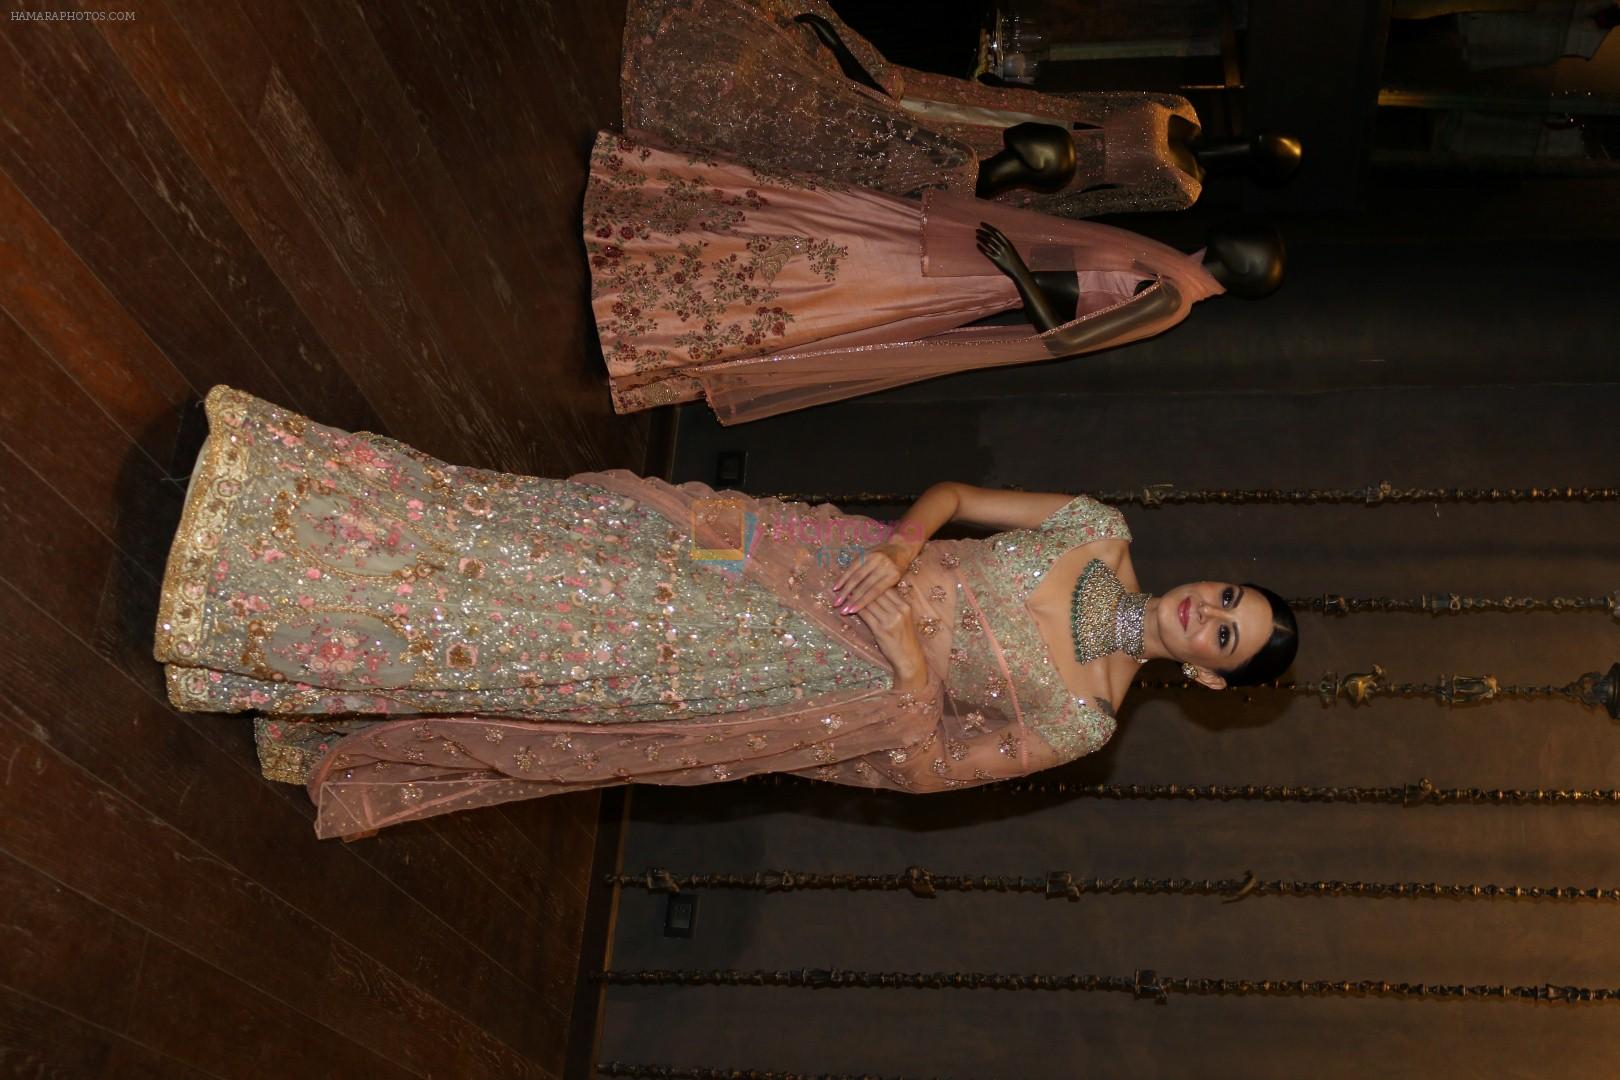 Aanchal Kumar at the Unveiling Of Shyamal & Bhumika�s Spring Summer 17 Collection on 31st March 2017